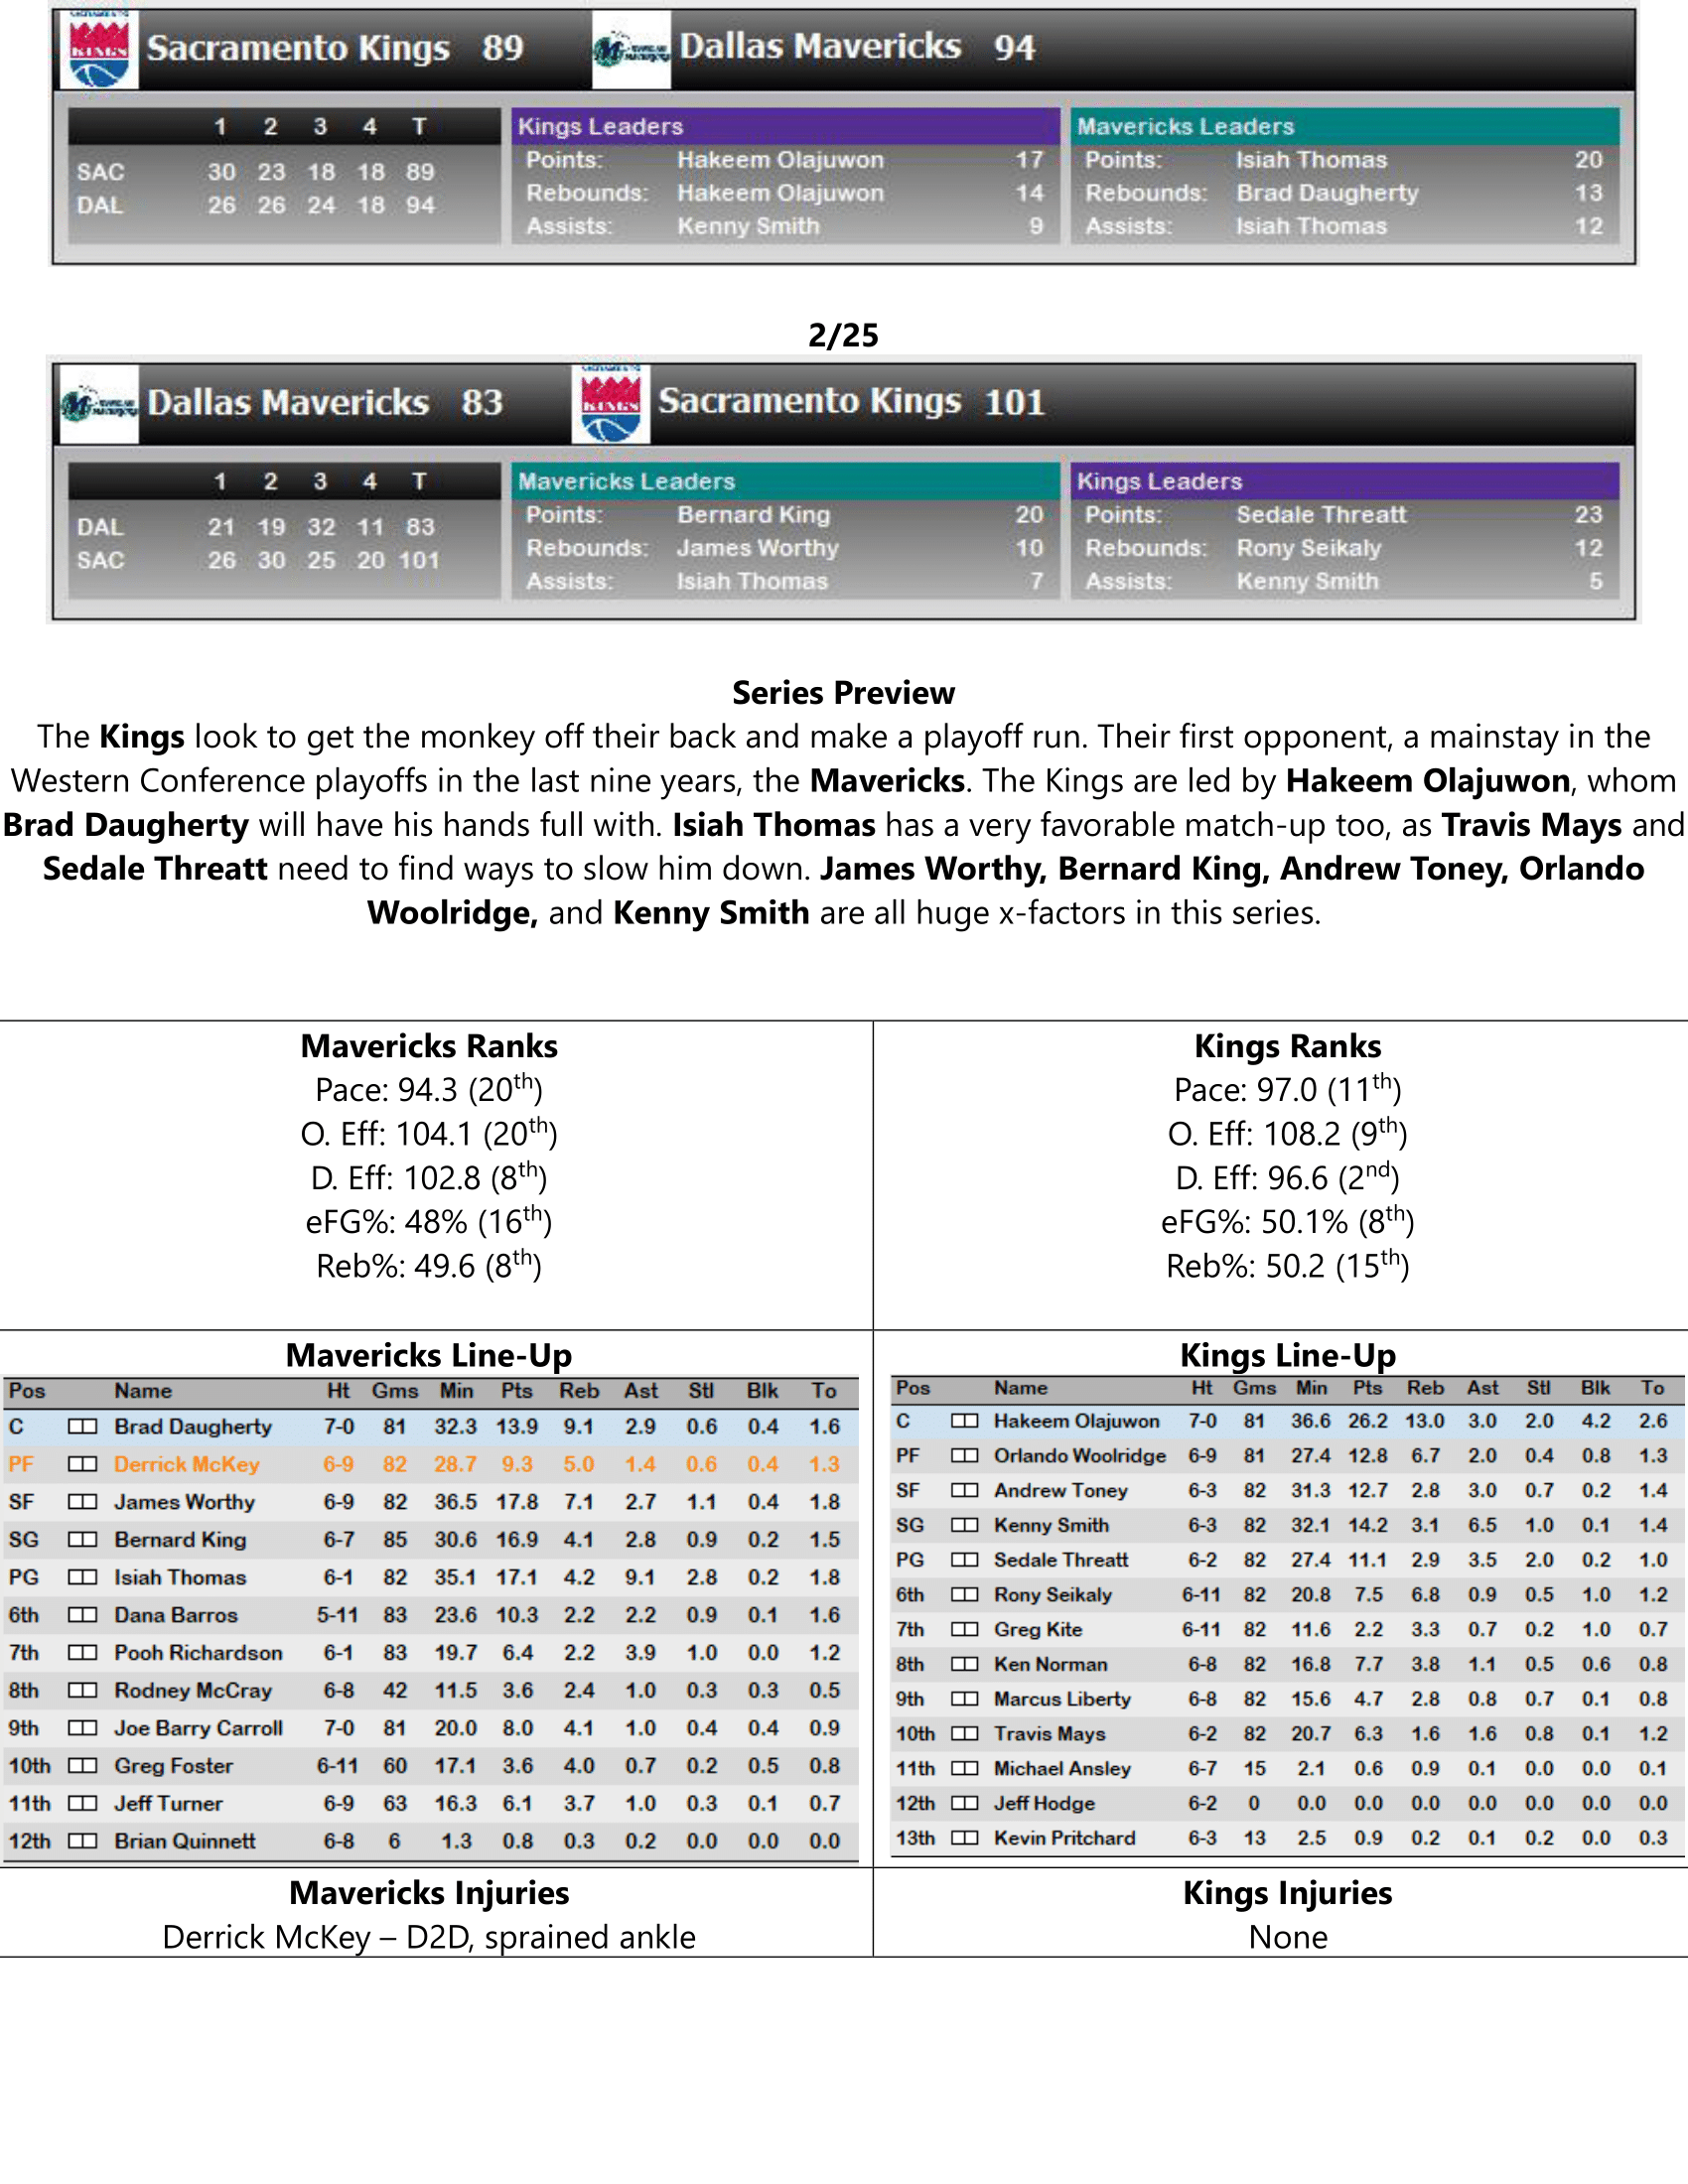 90-91-Part-4-Playoff-Preview-Round-1-02.png